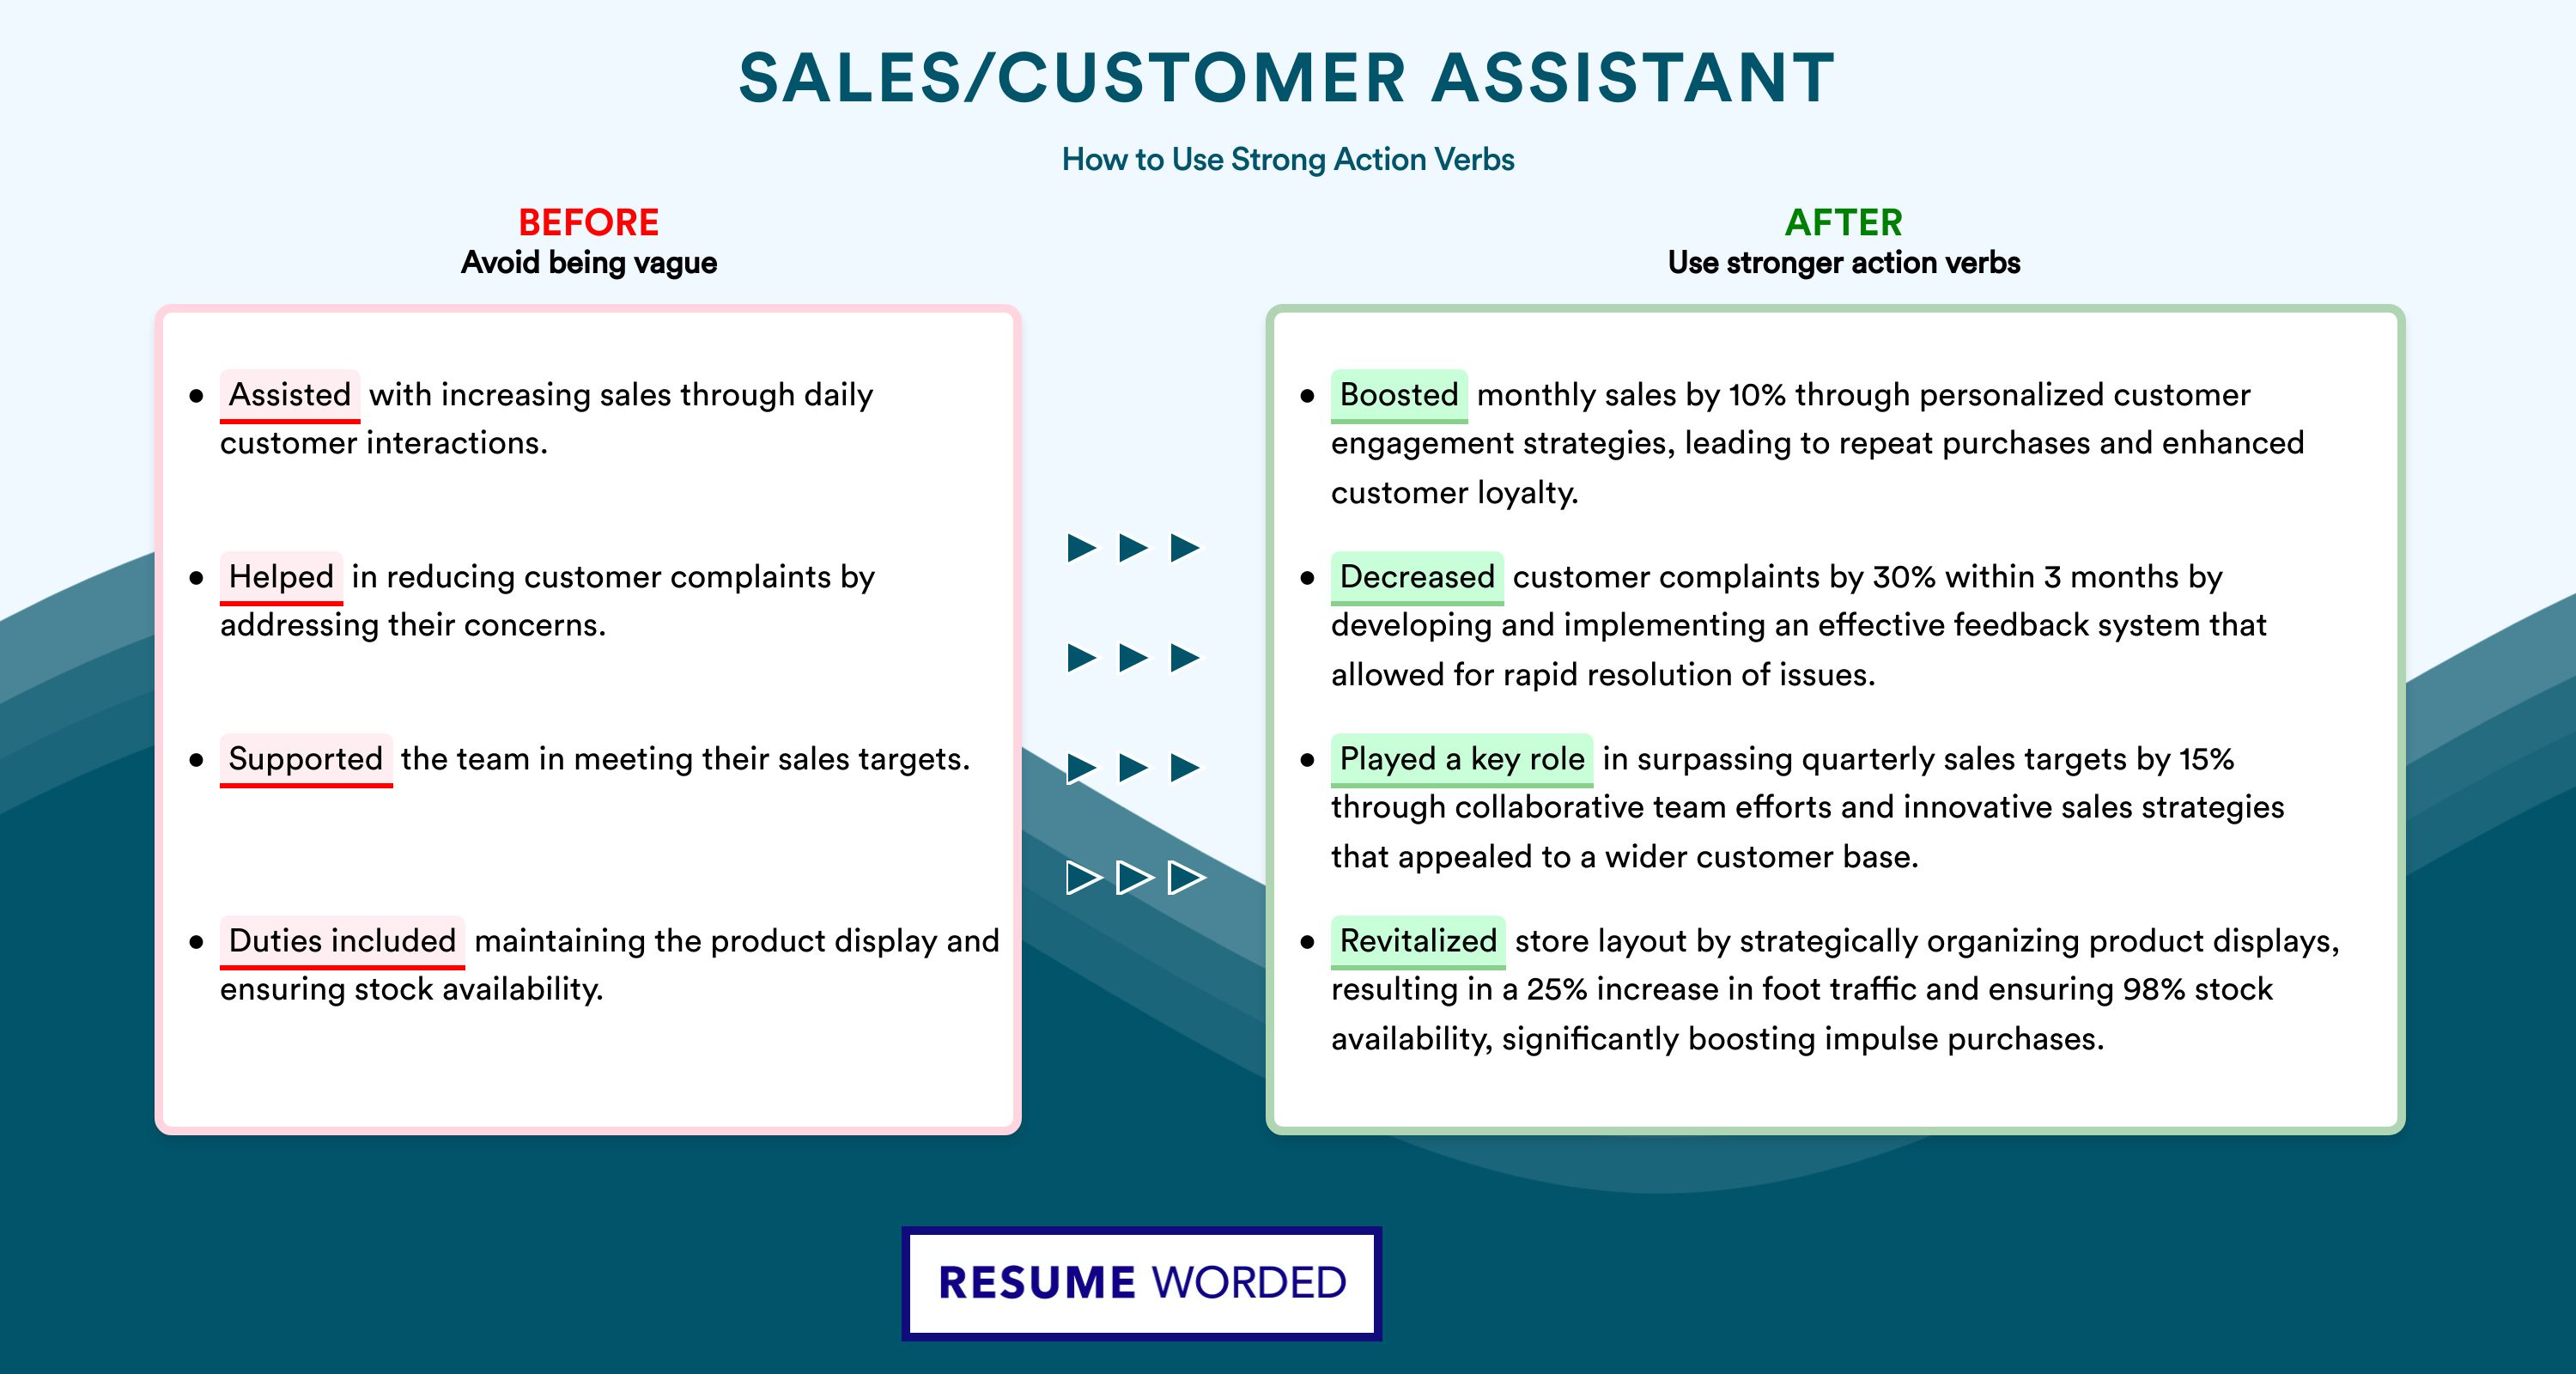 Action Verbs for Sales/Customer Assistant